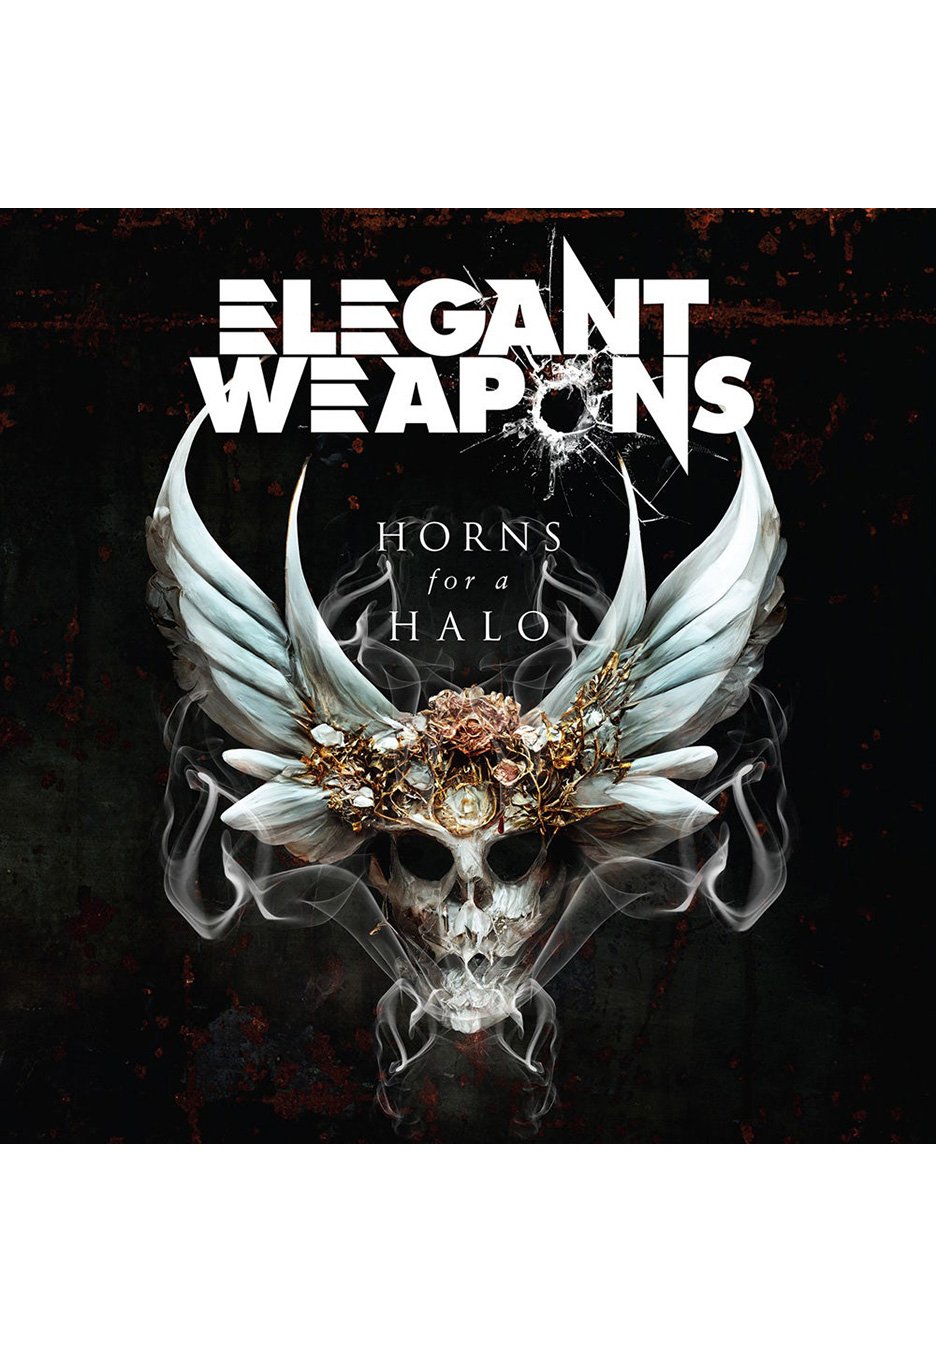 Elegant Weapons - Horns For A Halo Ltd. Clear/Gold Bi-Coloured - Colored 2 Vinyl